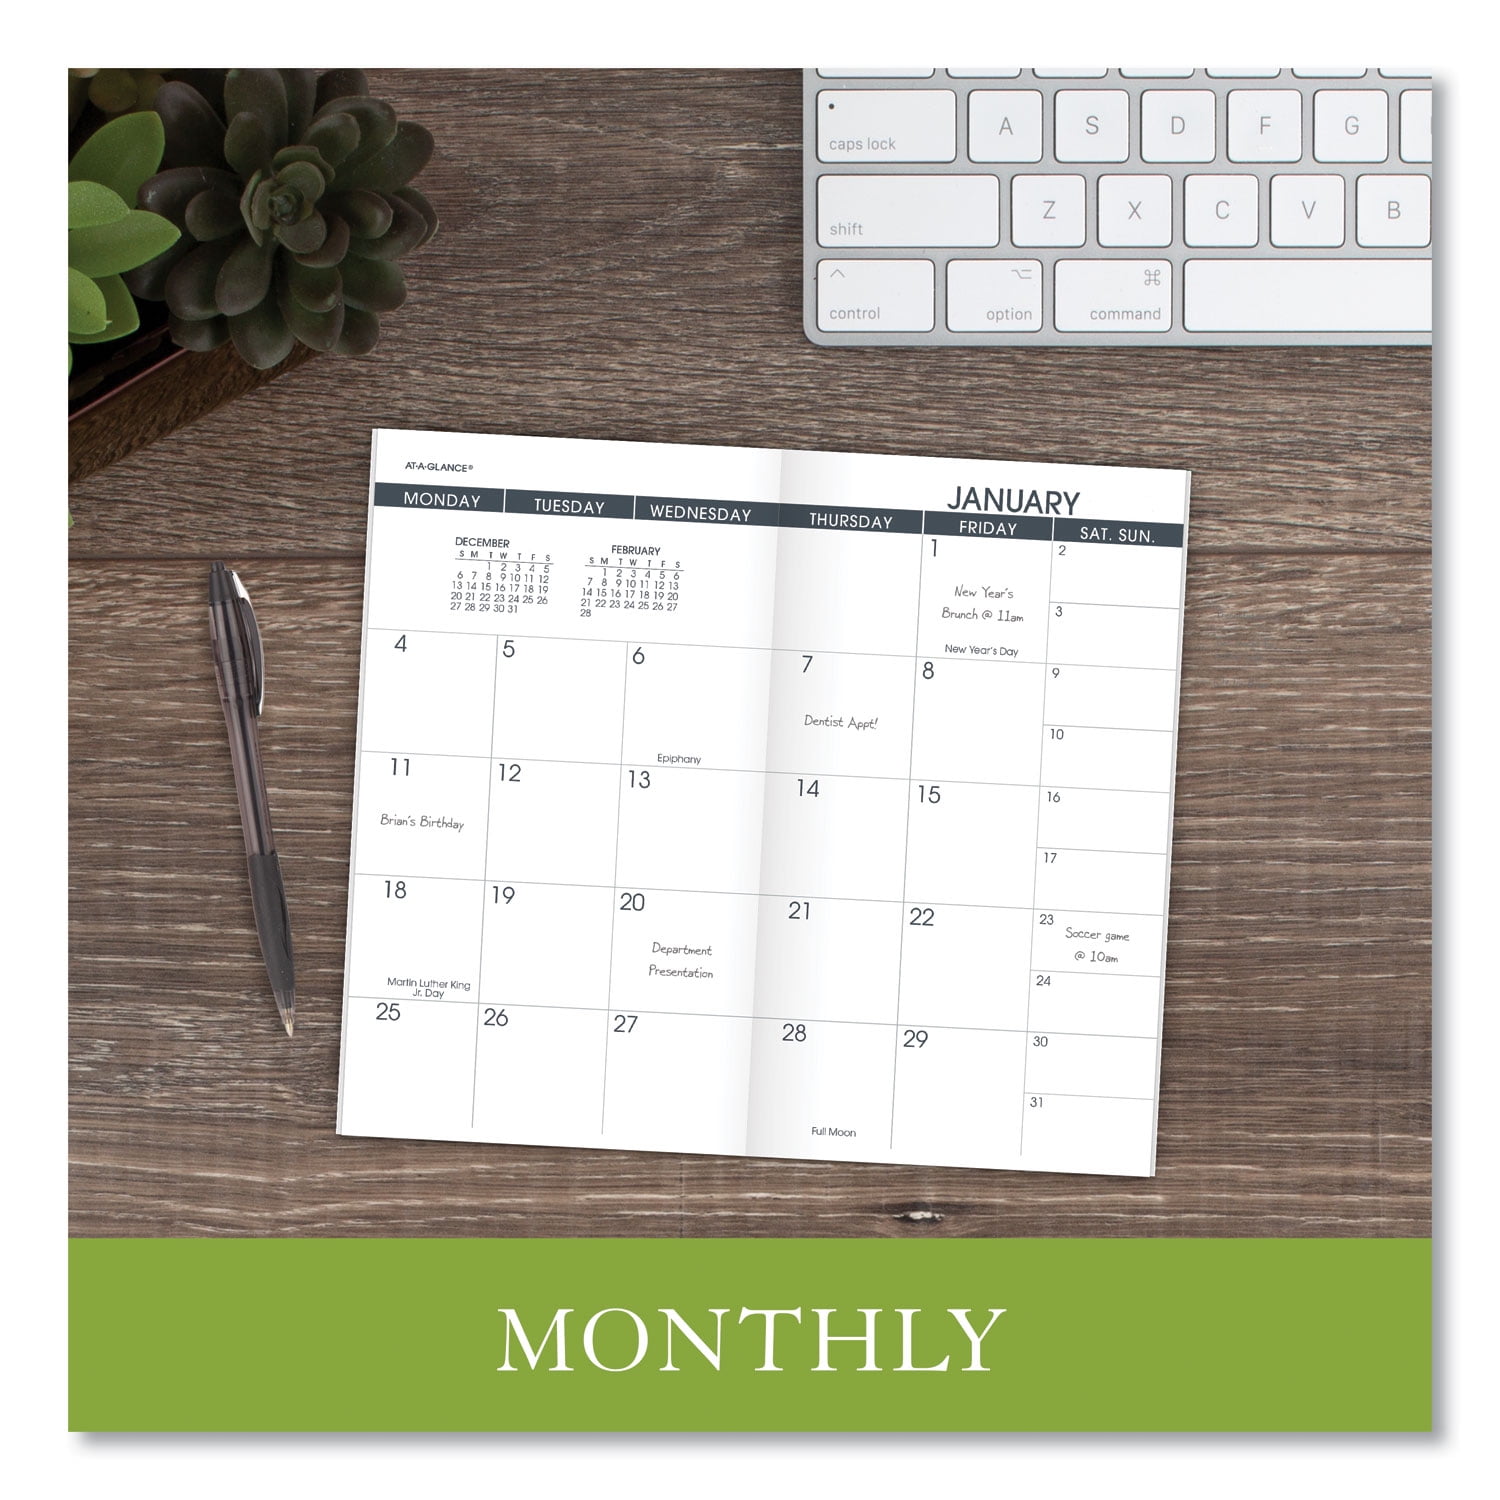 Executive Details about   2021 Monthly Planner Refill for 70-064 by AT-A-GLANCE 3-1/2" x 6"